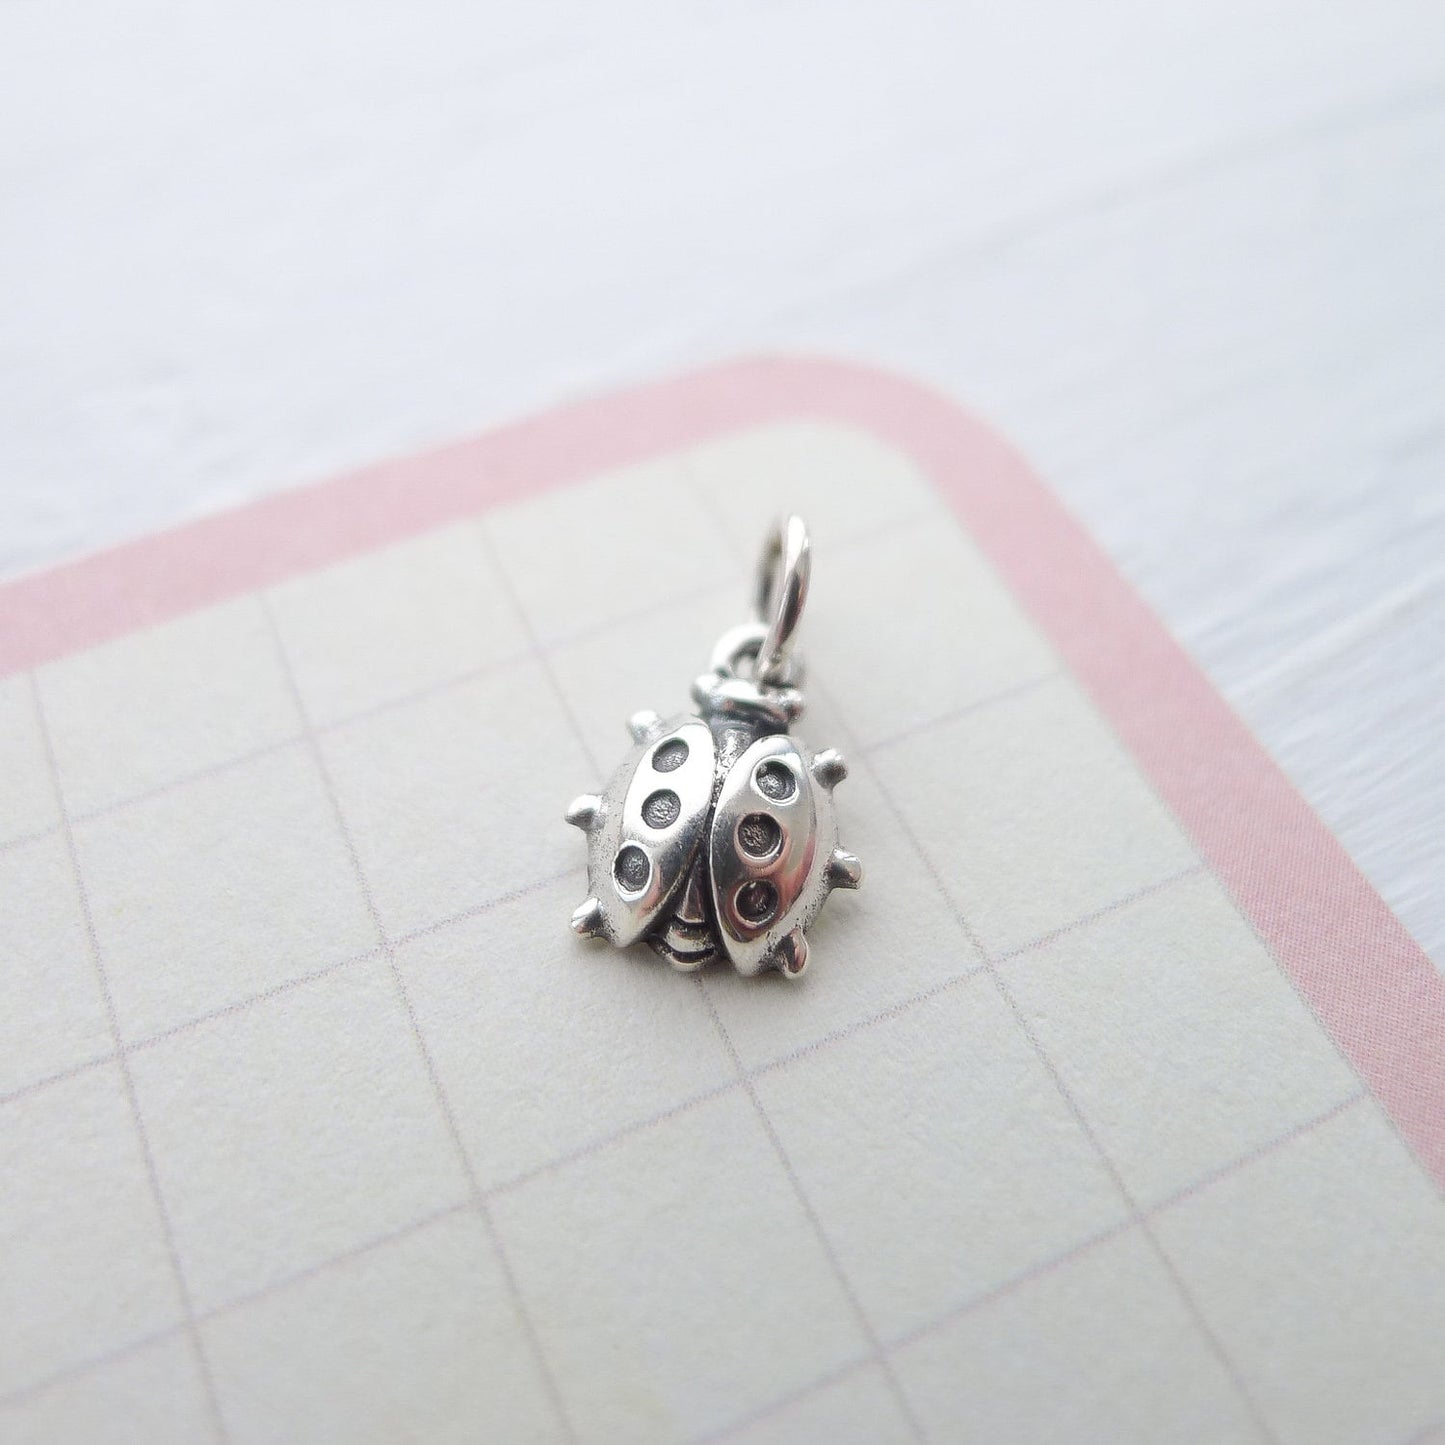 Ladybug Charm Lady Bug Pendant Sterling Silver Cute Jewelry Making Supplies